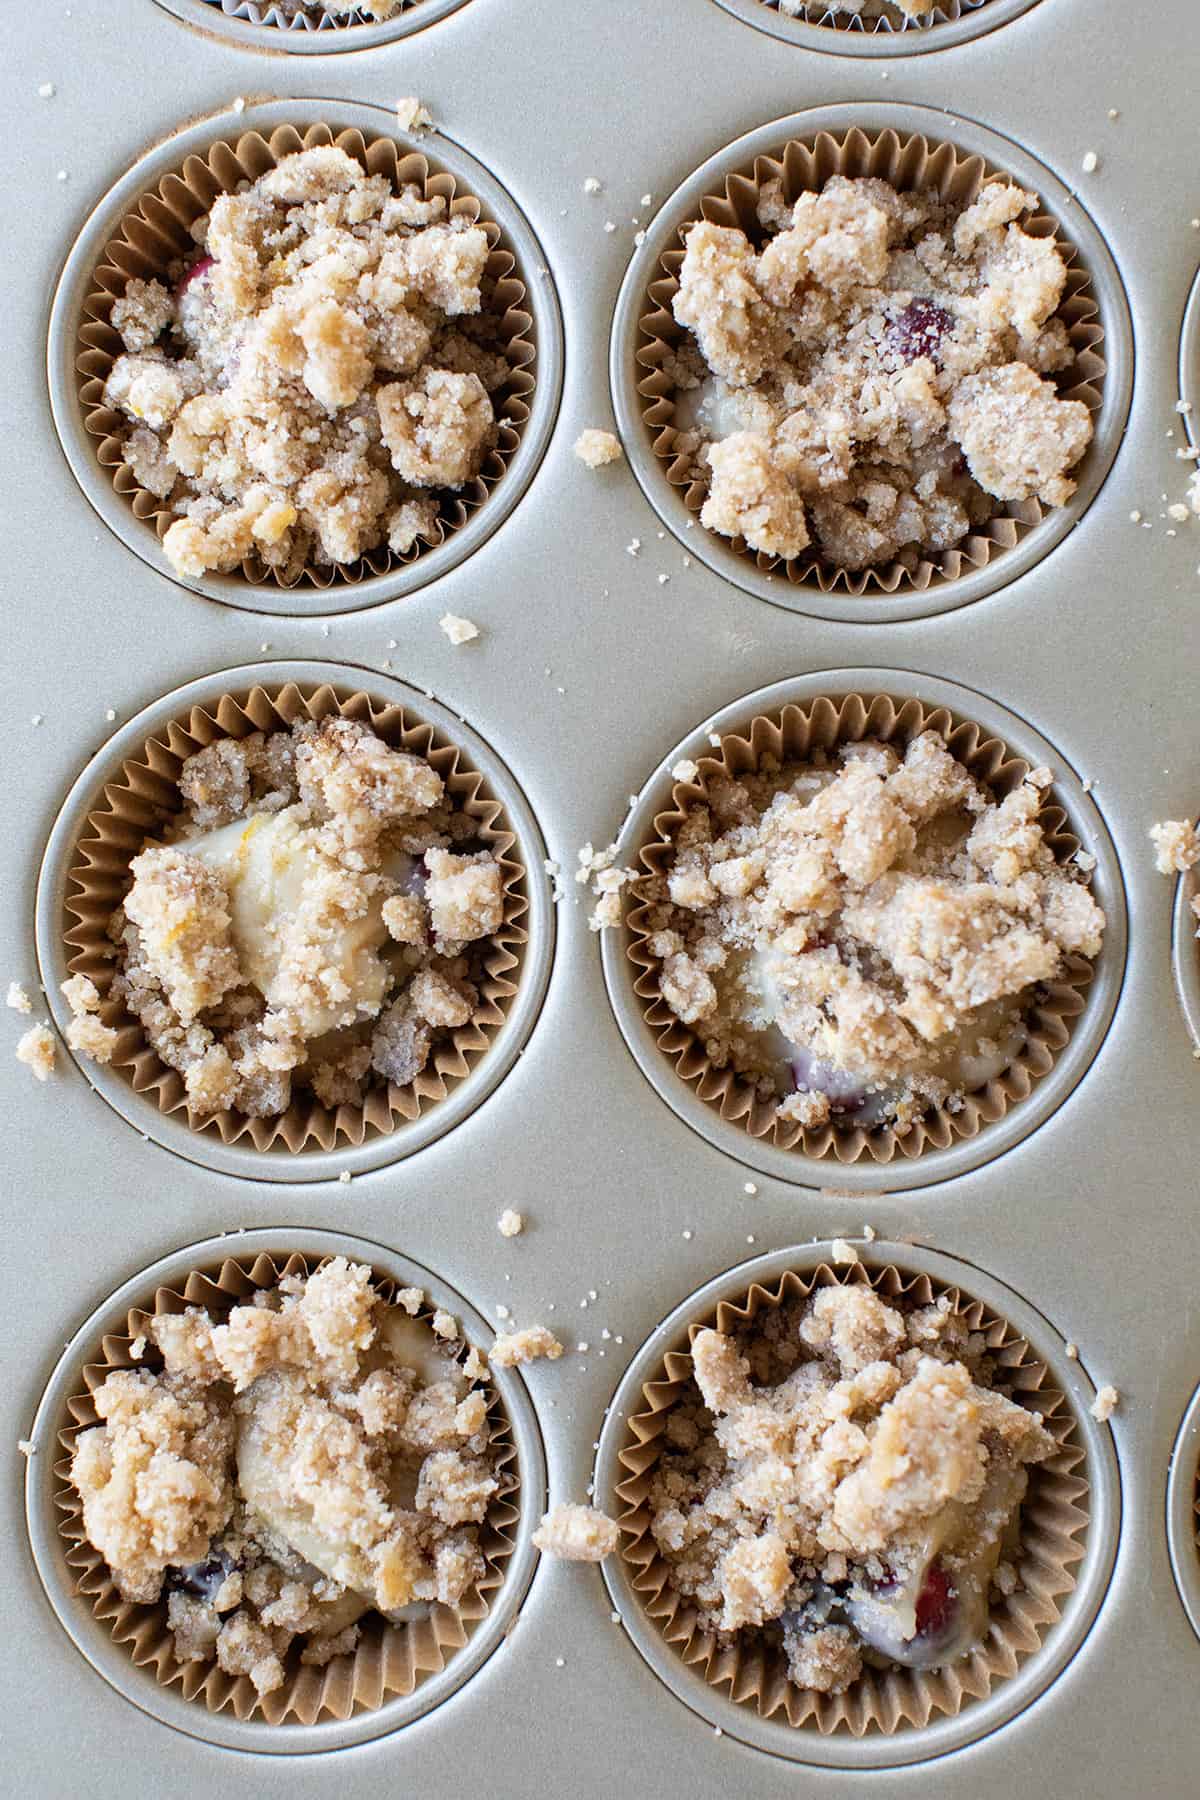 Muffin batter with streusel topping in a cupcake tin.